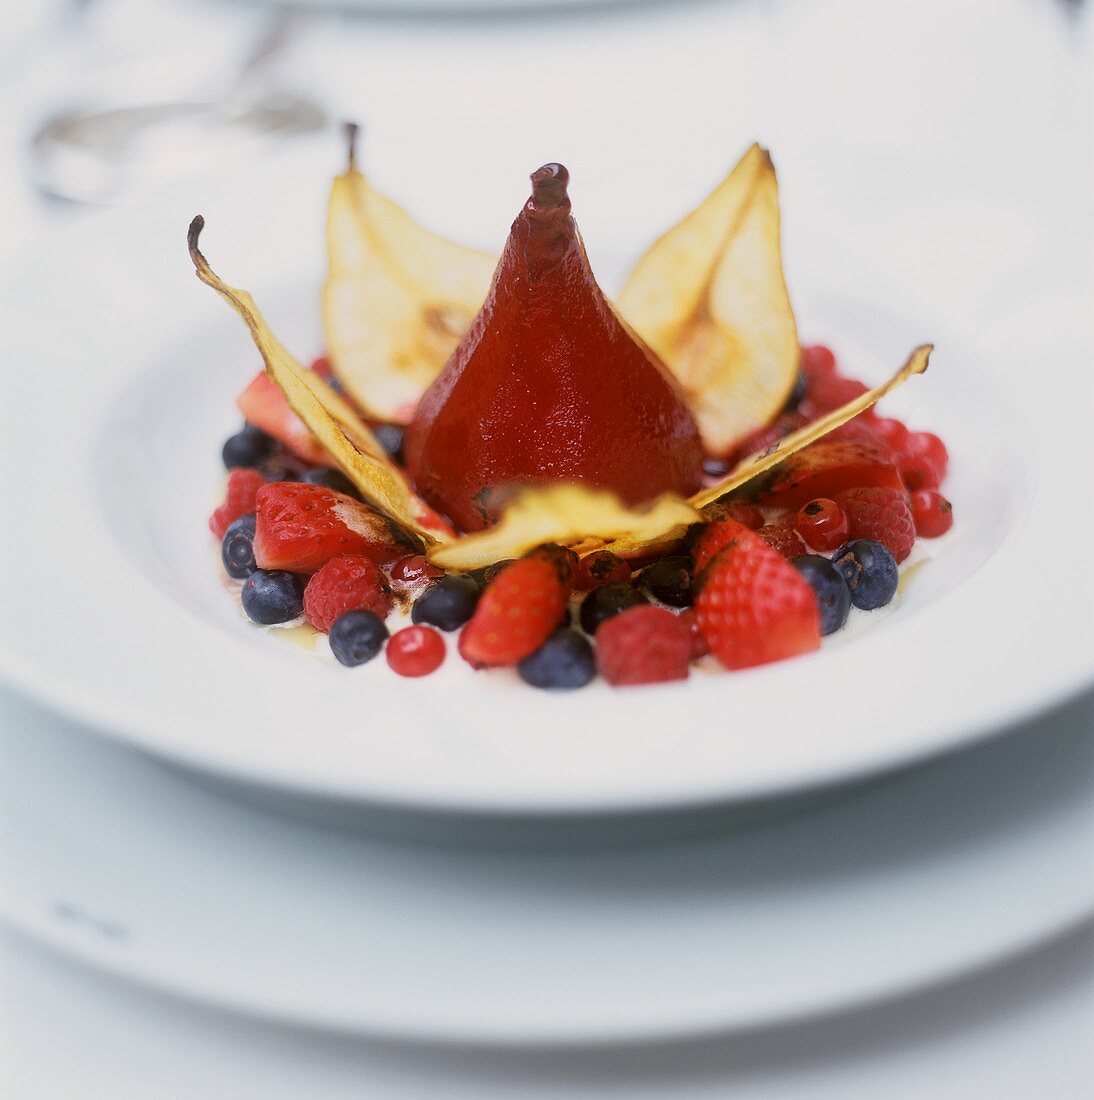 Poached red wine pear with pear crisps and berries